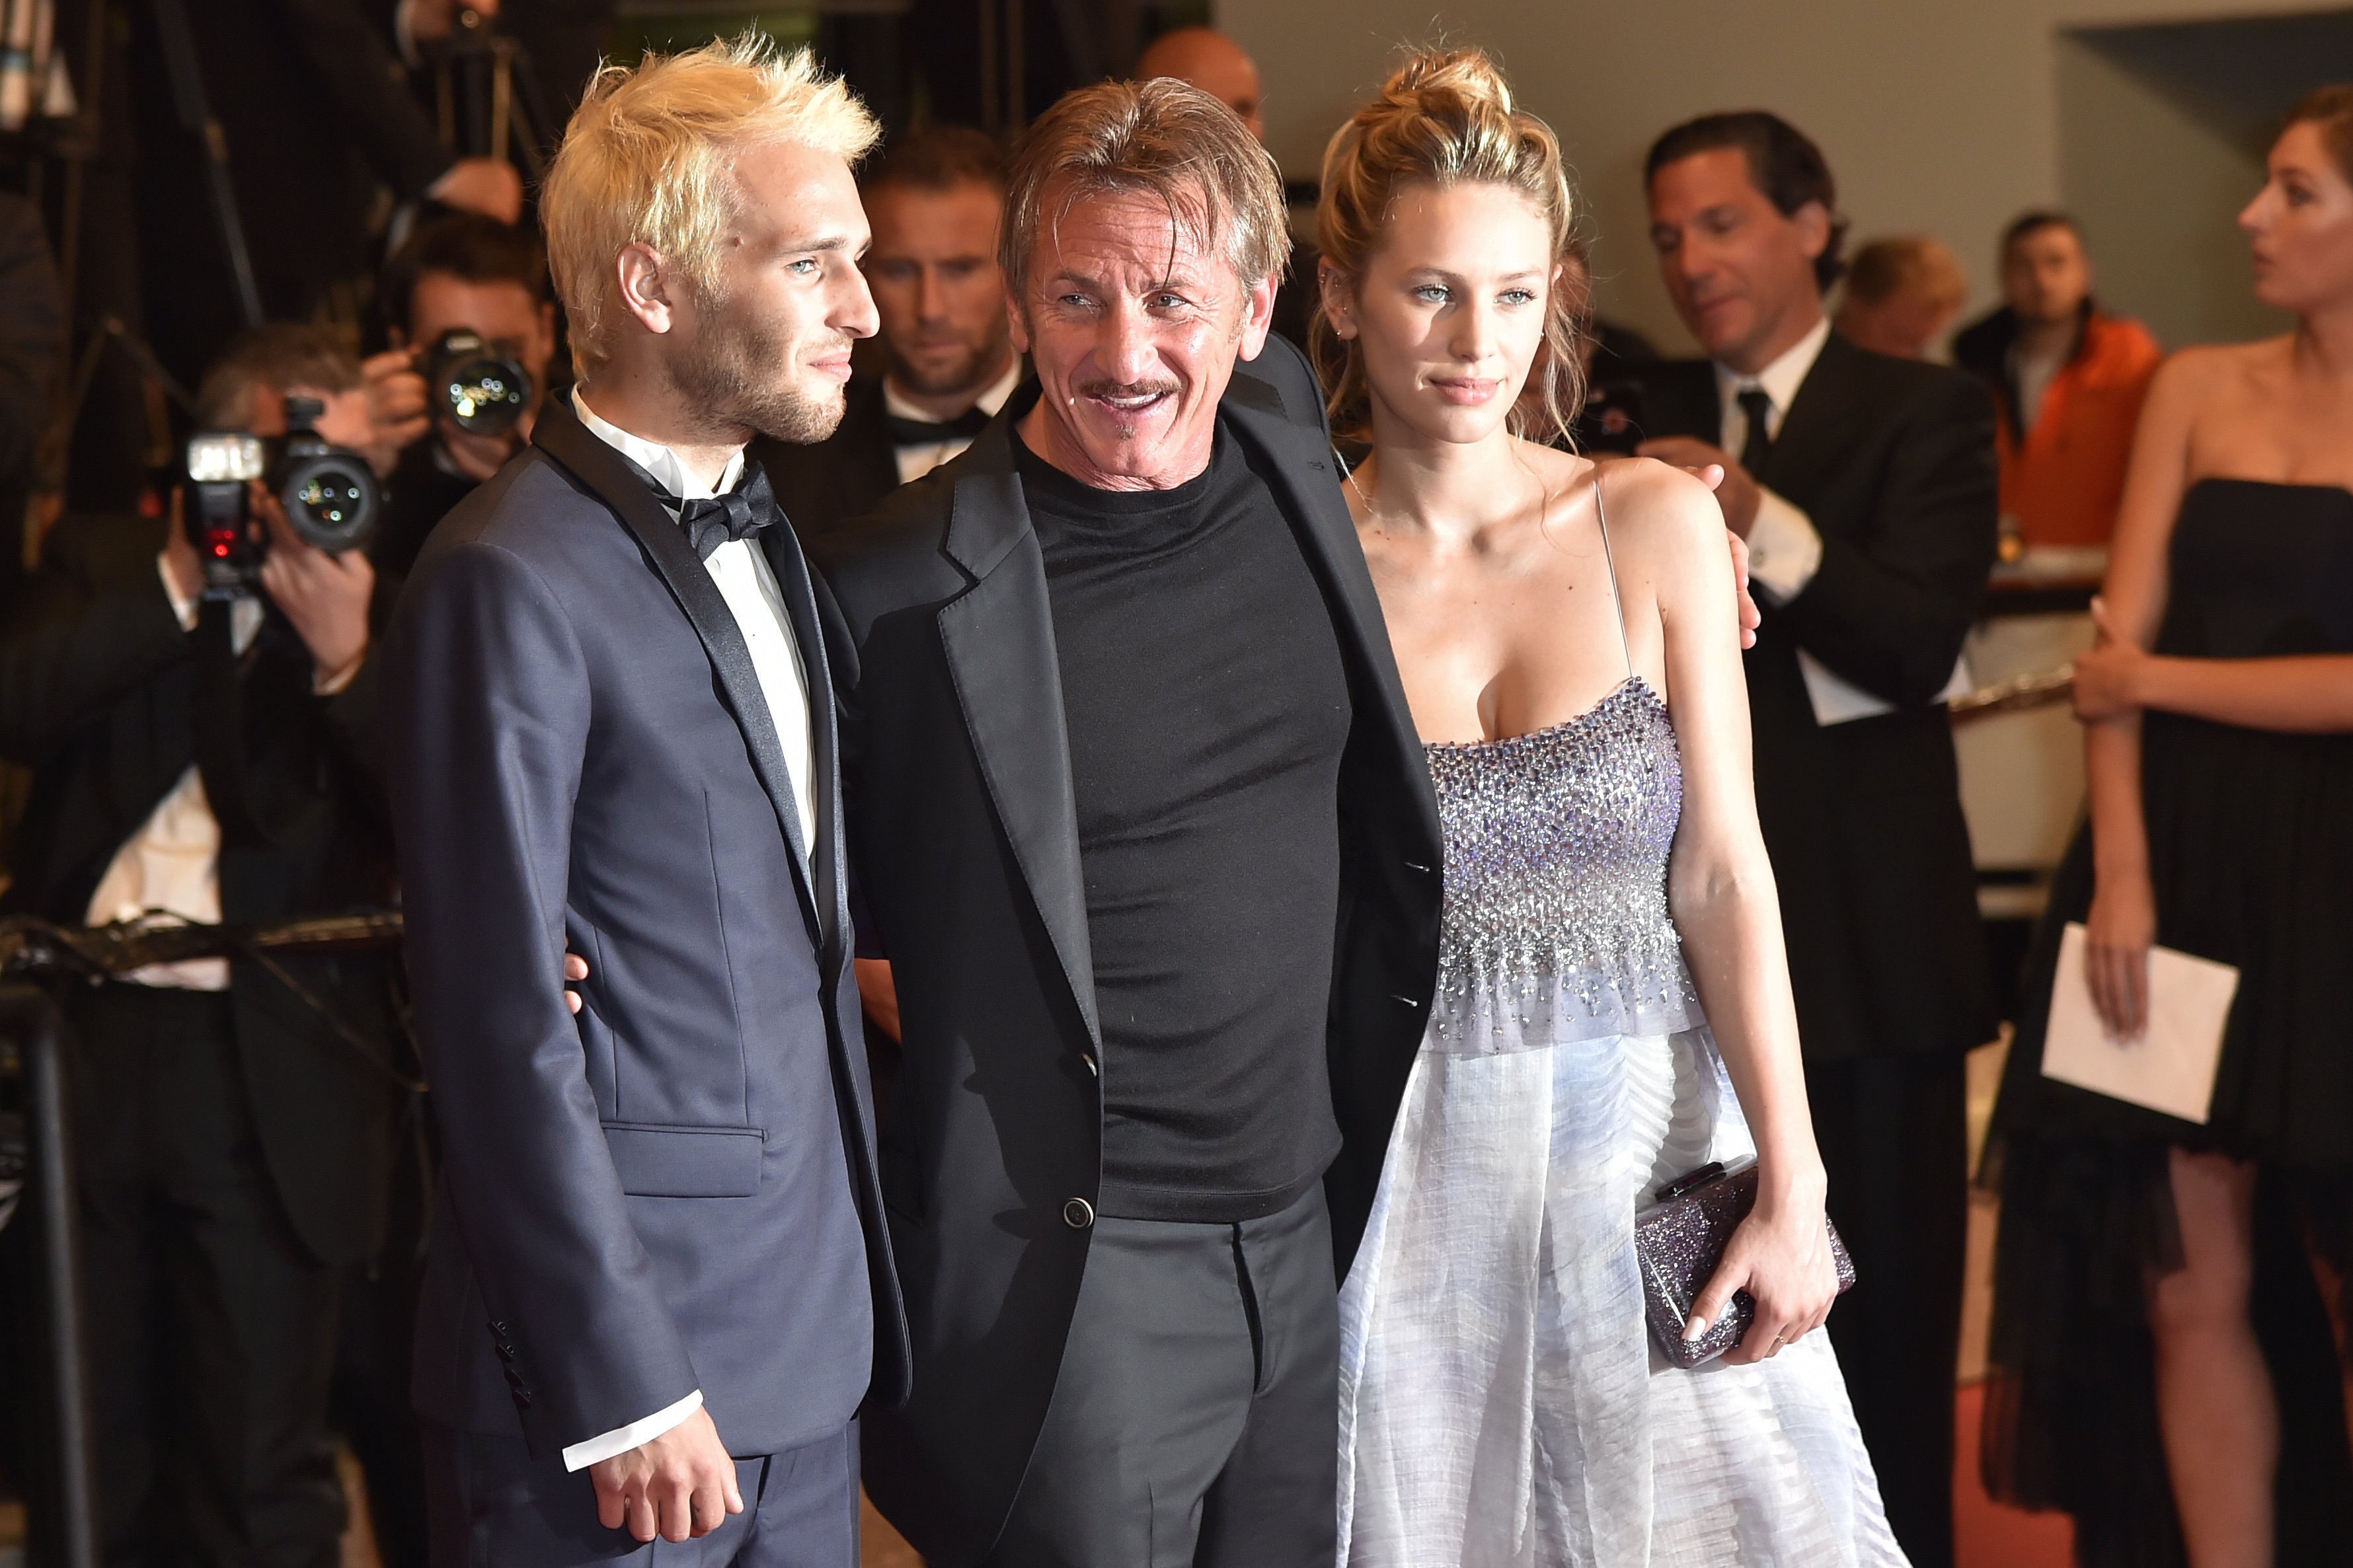 Sean Penn poses with his children Hopper Penn and Dylan Penn before leaving the Festival Palace on May 20, 2016 in Cannes, France ┃Source: Getty Images